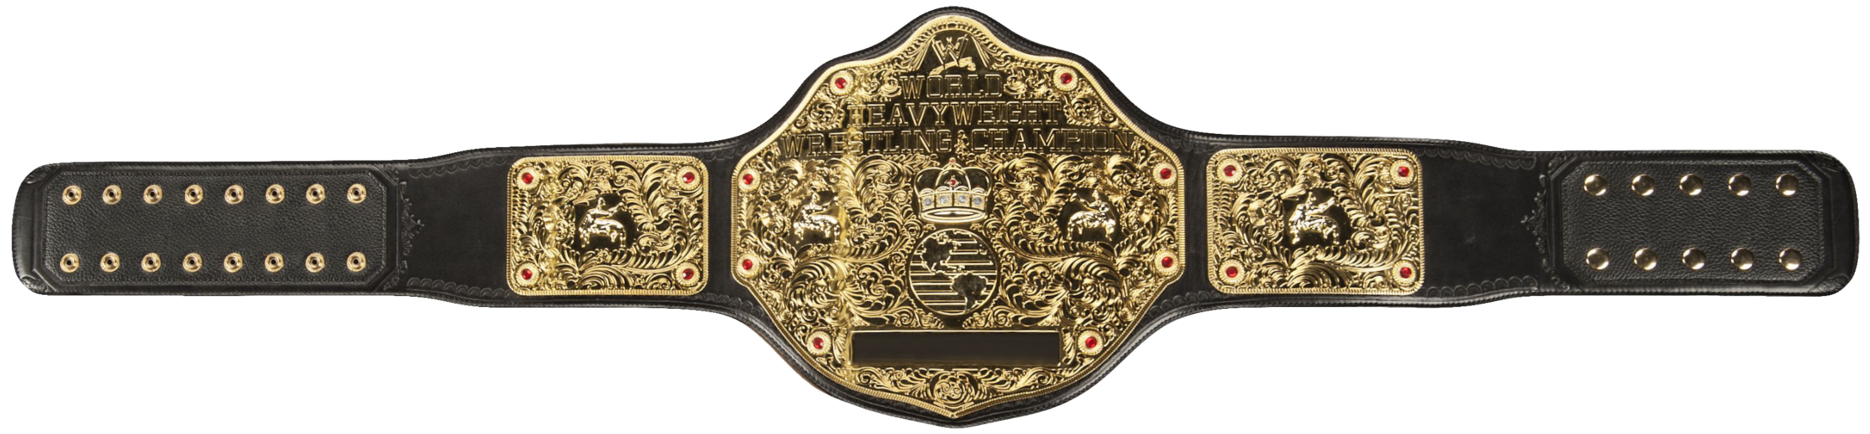 World Heavyweight Championship By Nibble T On Deviantart